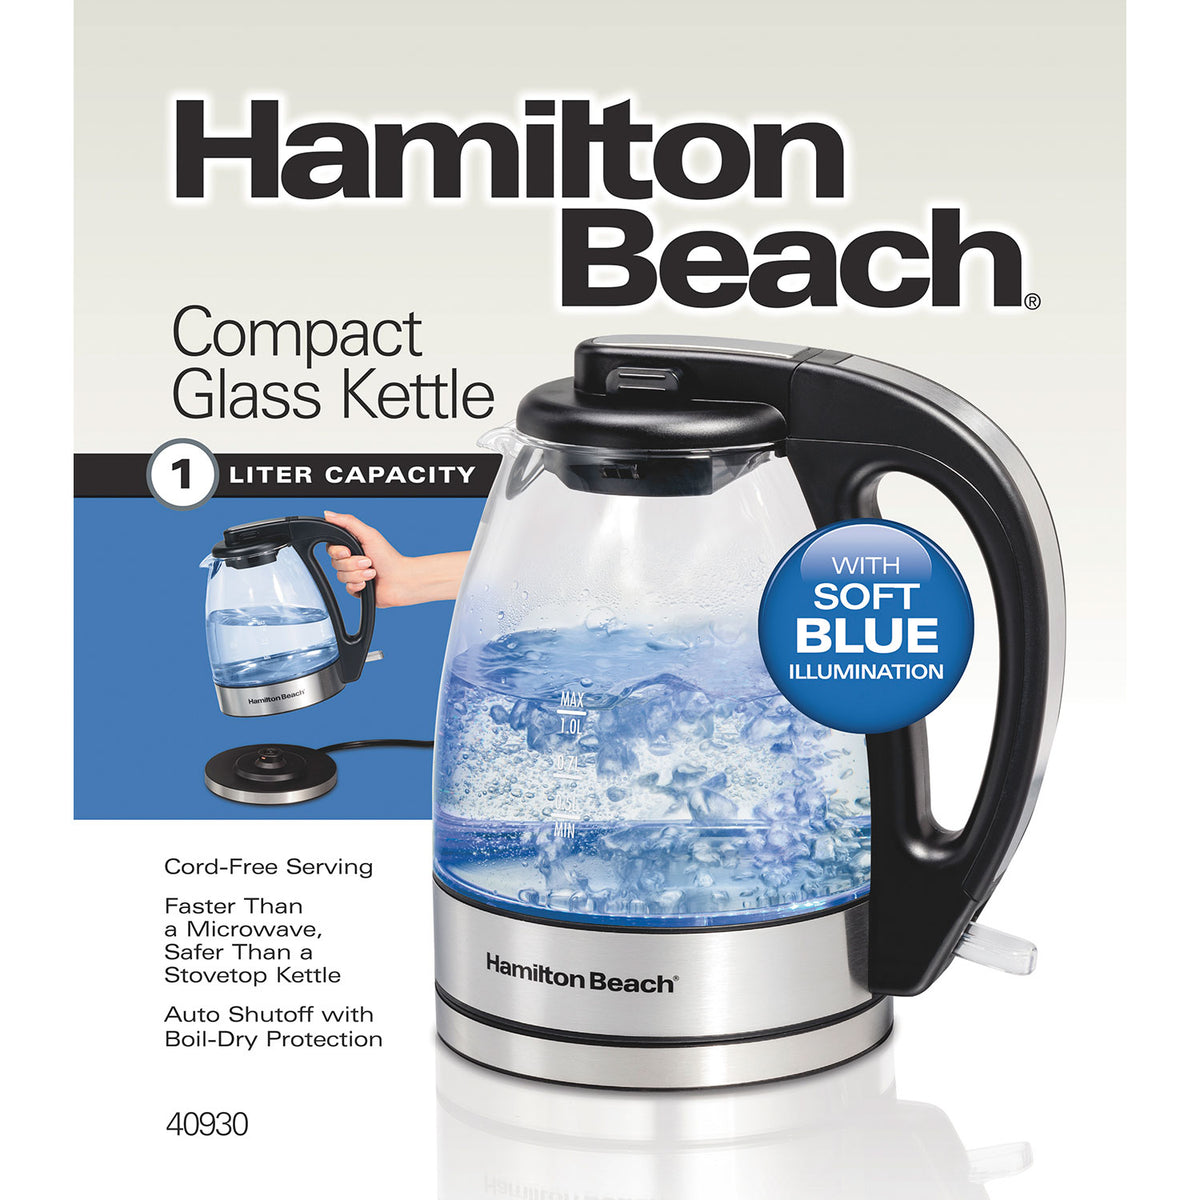 Compact 1 Liter Glass Kettle